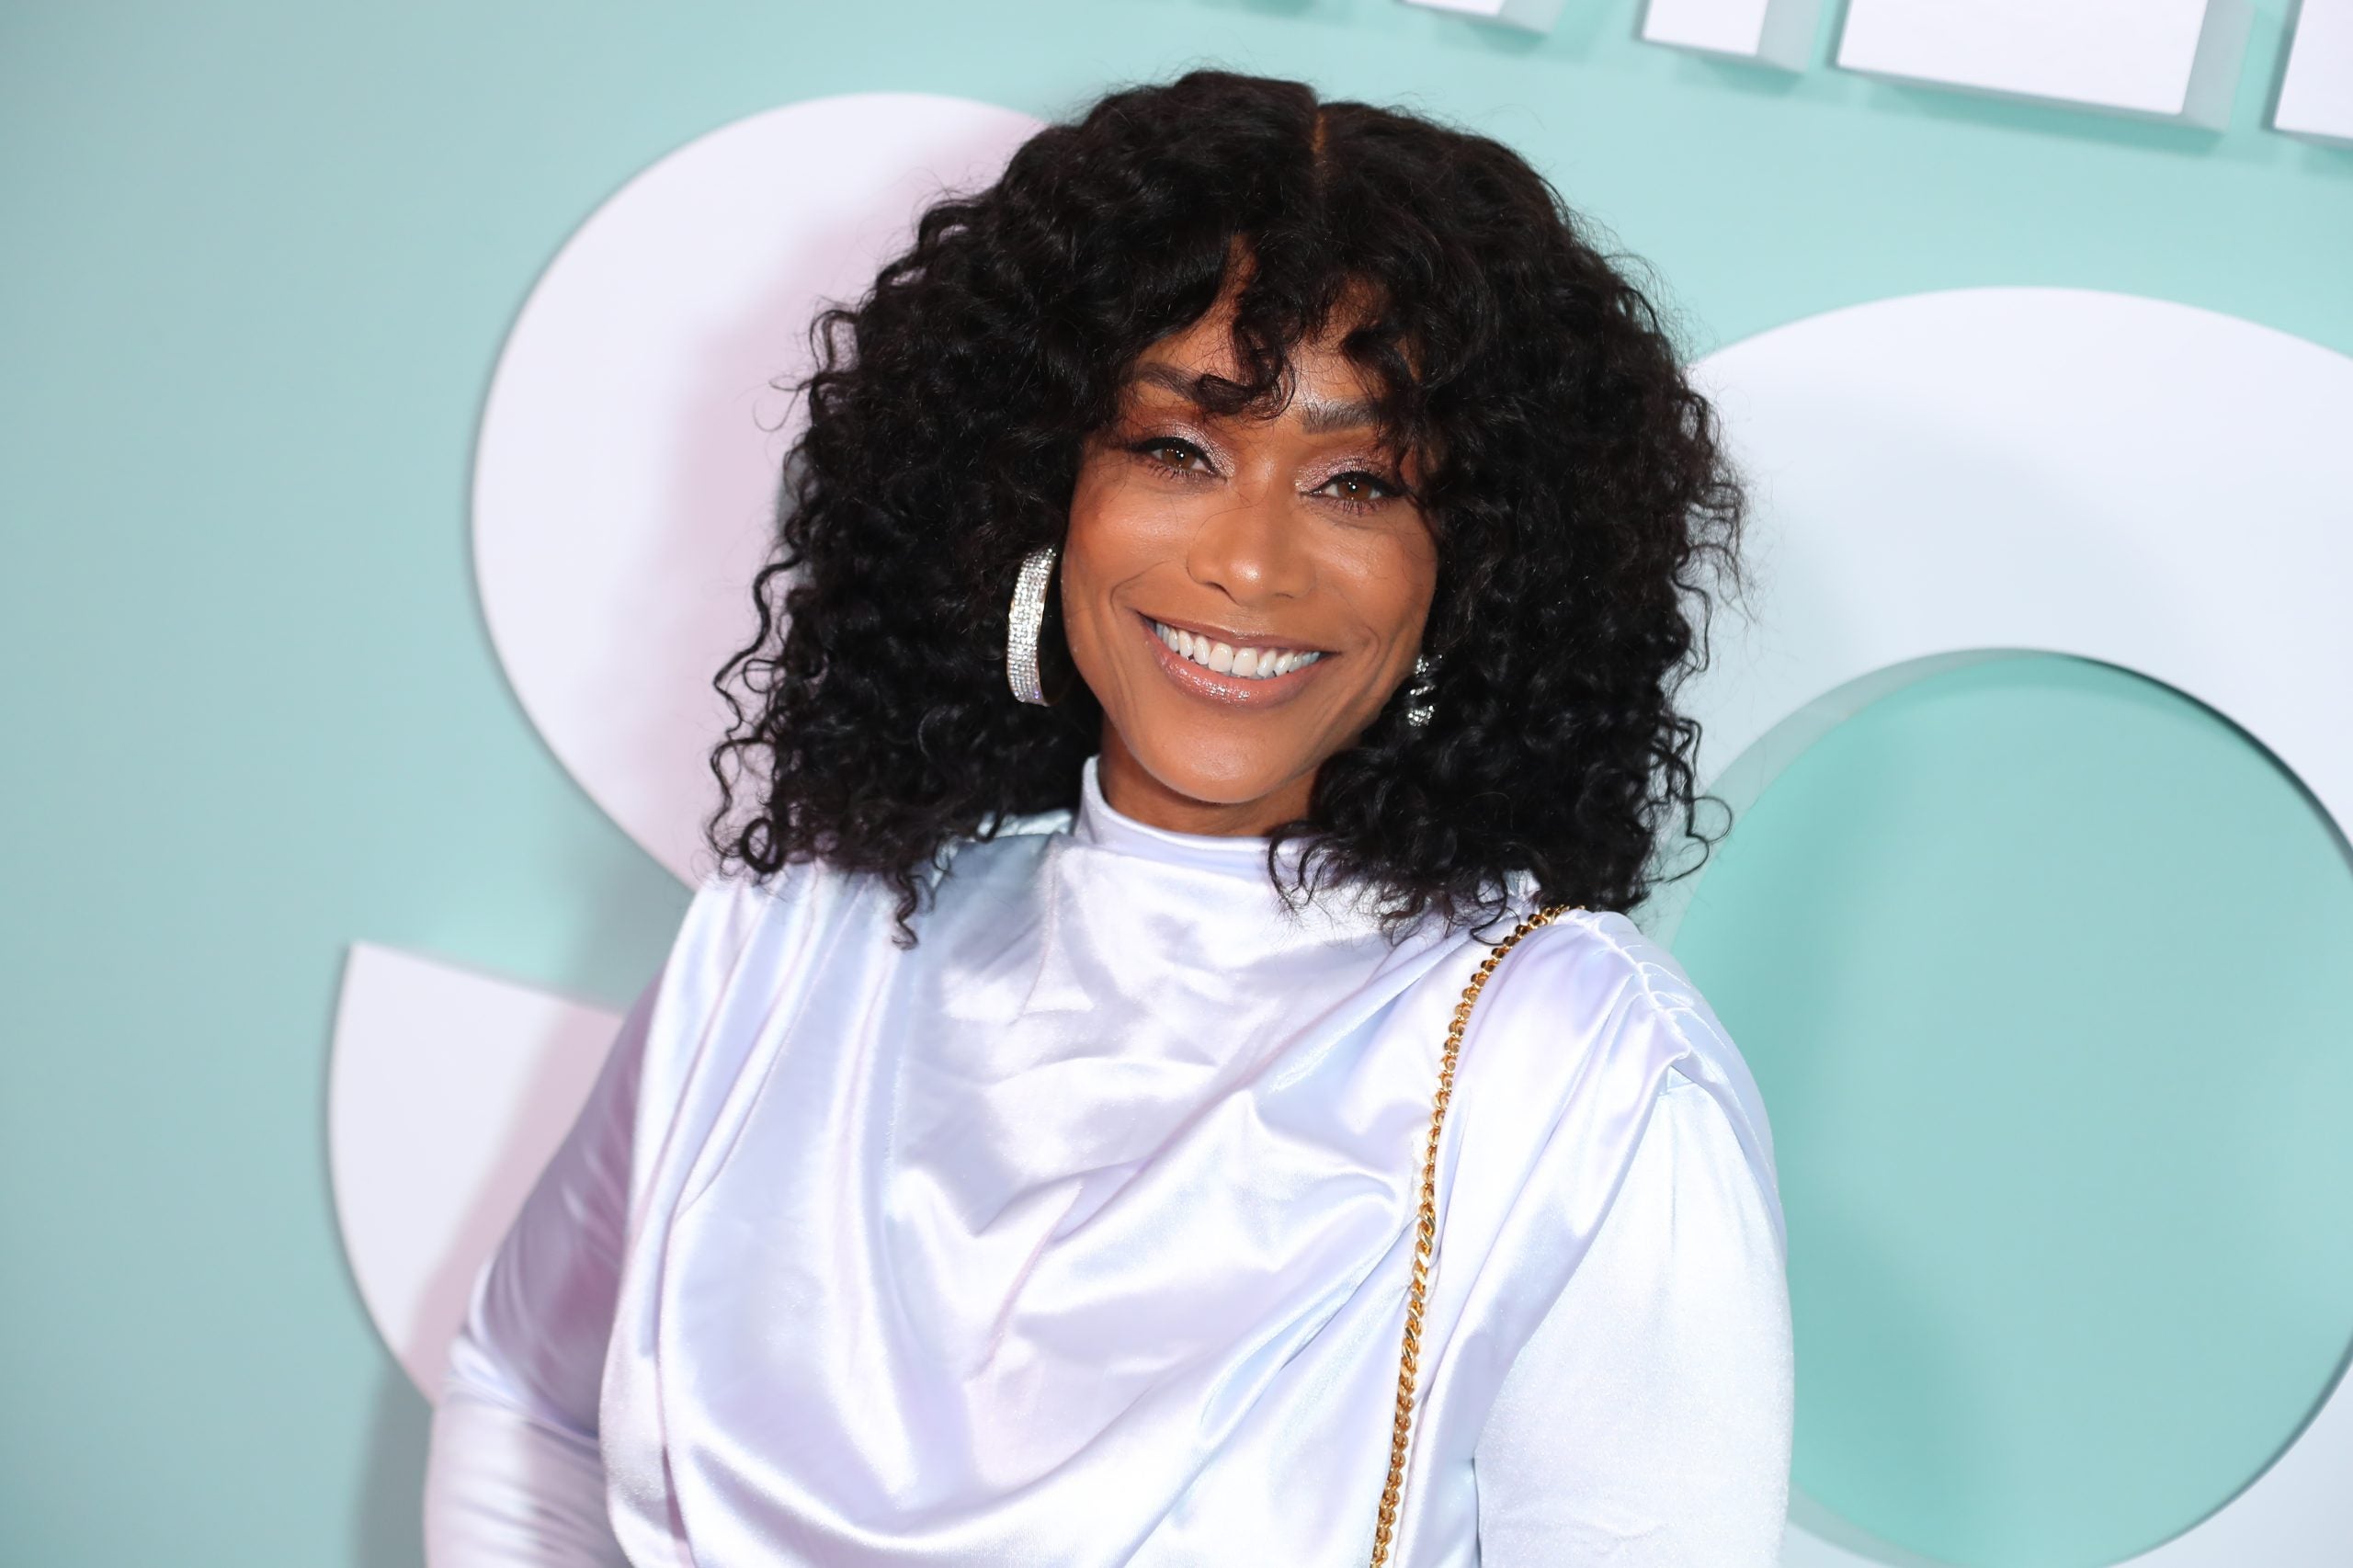 Tami Roman Explains Why She Is Fine With Her Husband Having A Child With Someone Else